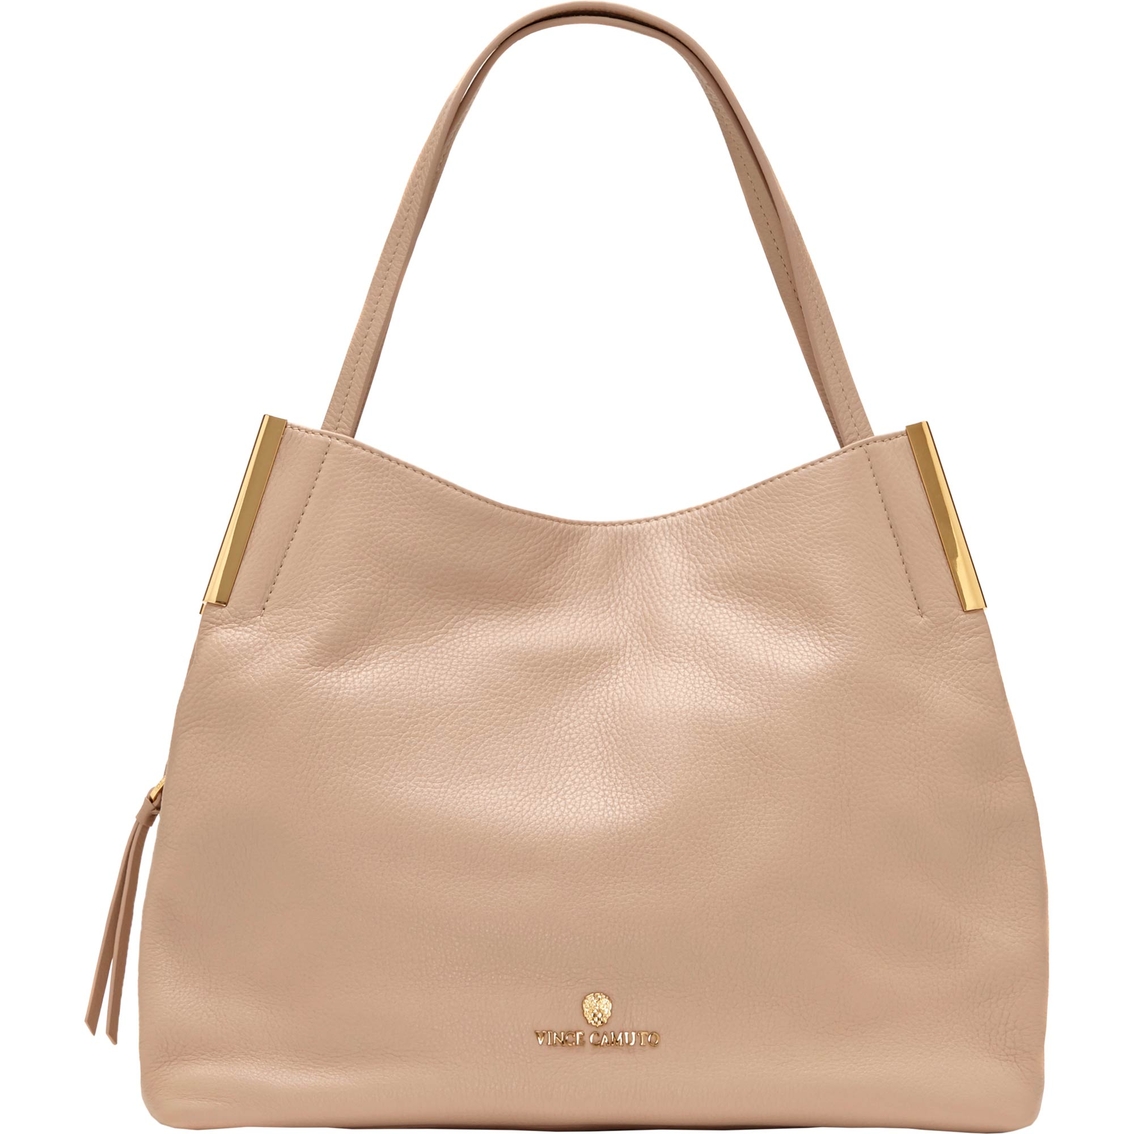 Vince Camuto Tina Tote | Totes & Shoppers | Handbags & Accessories ...